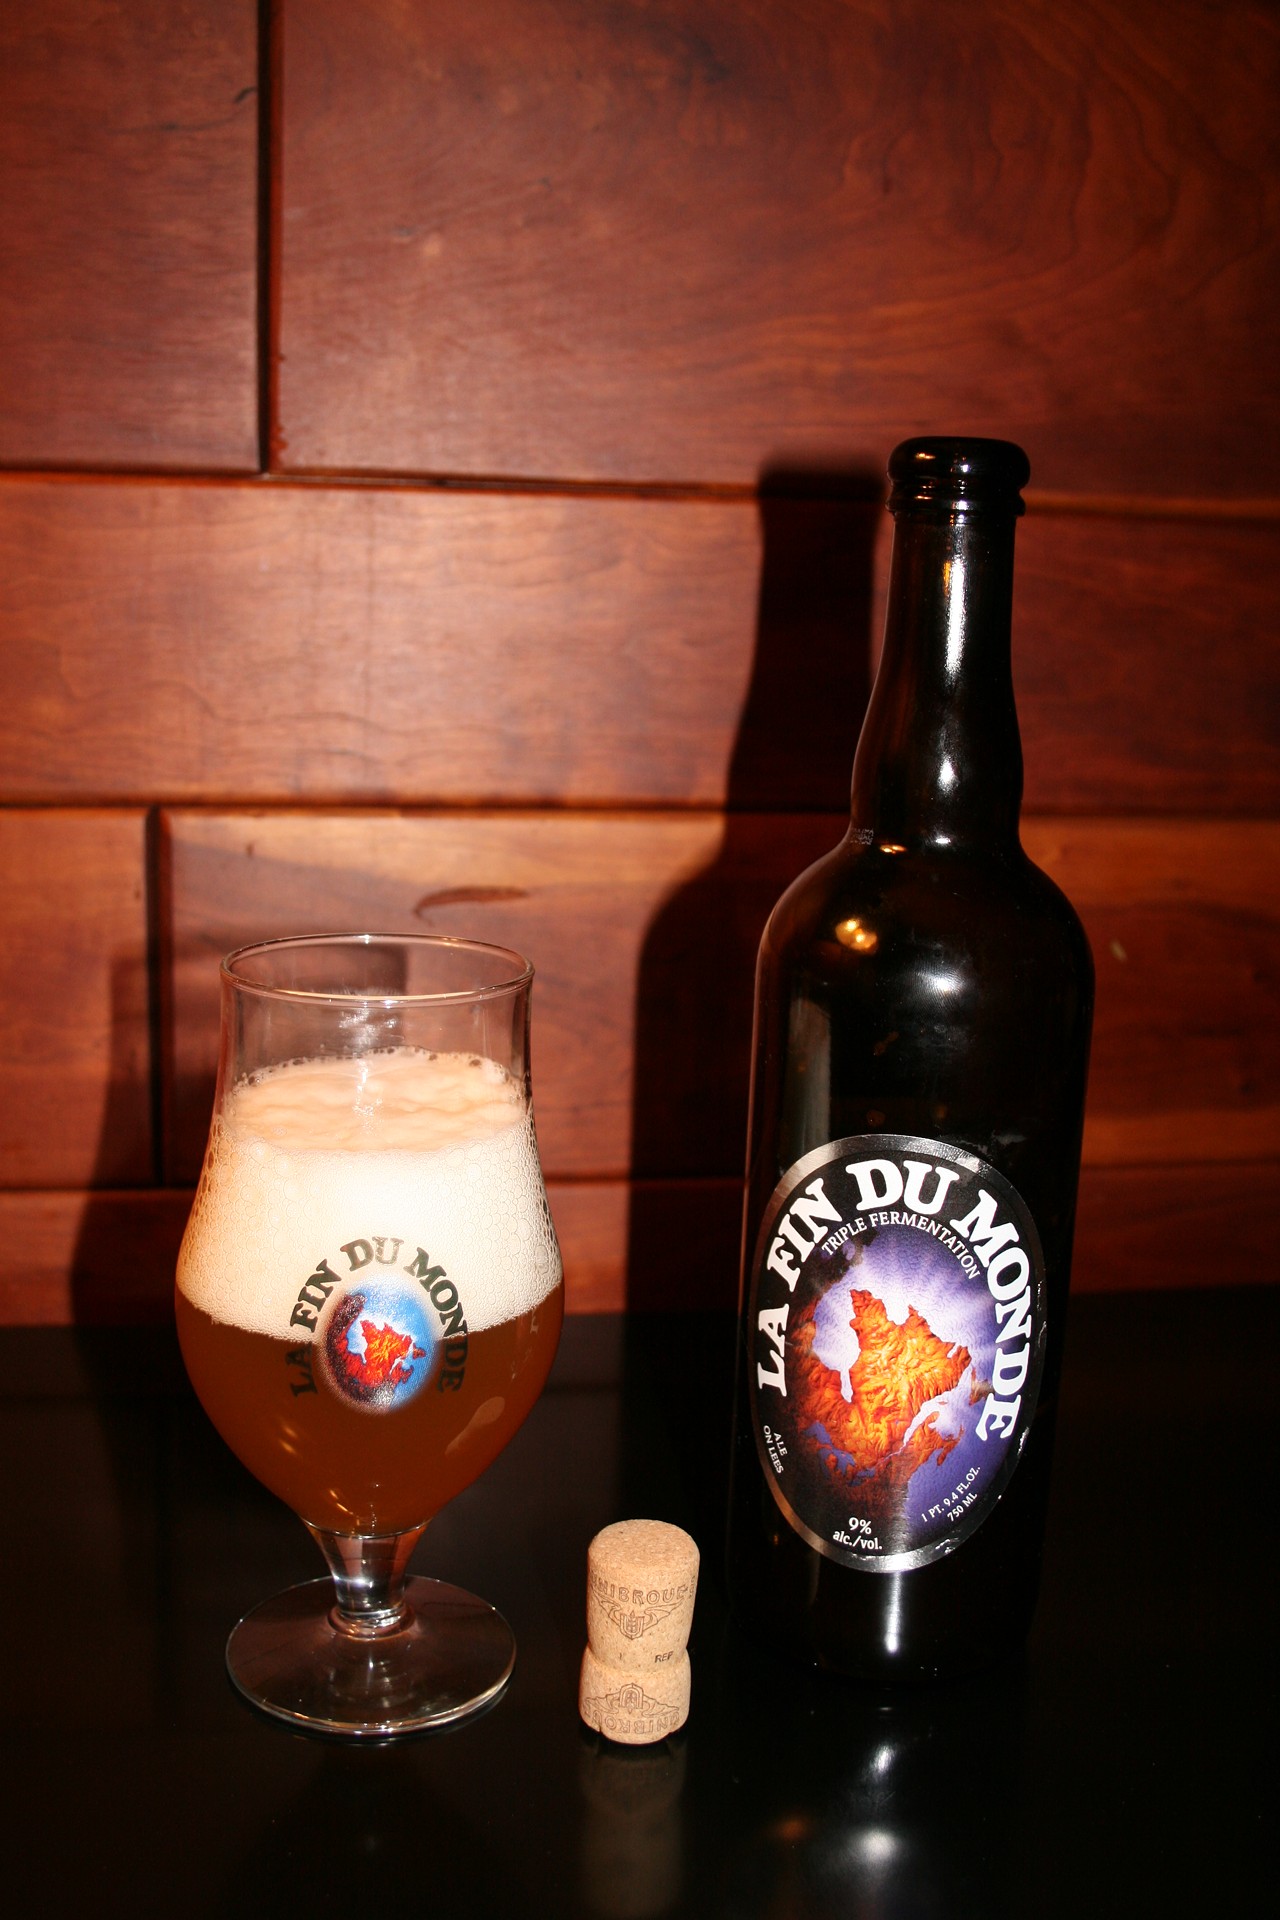 Wednesday, Oct. 29Unibroue DinnerFive-course dinner with beer pairings from Unibroue